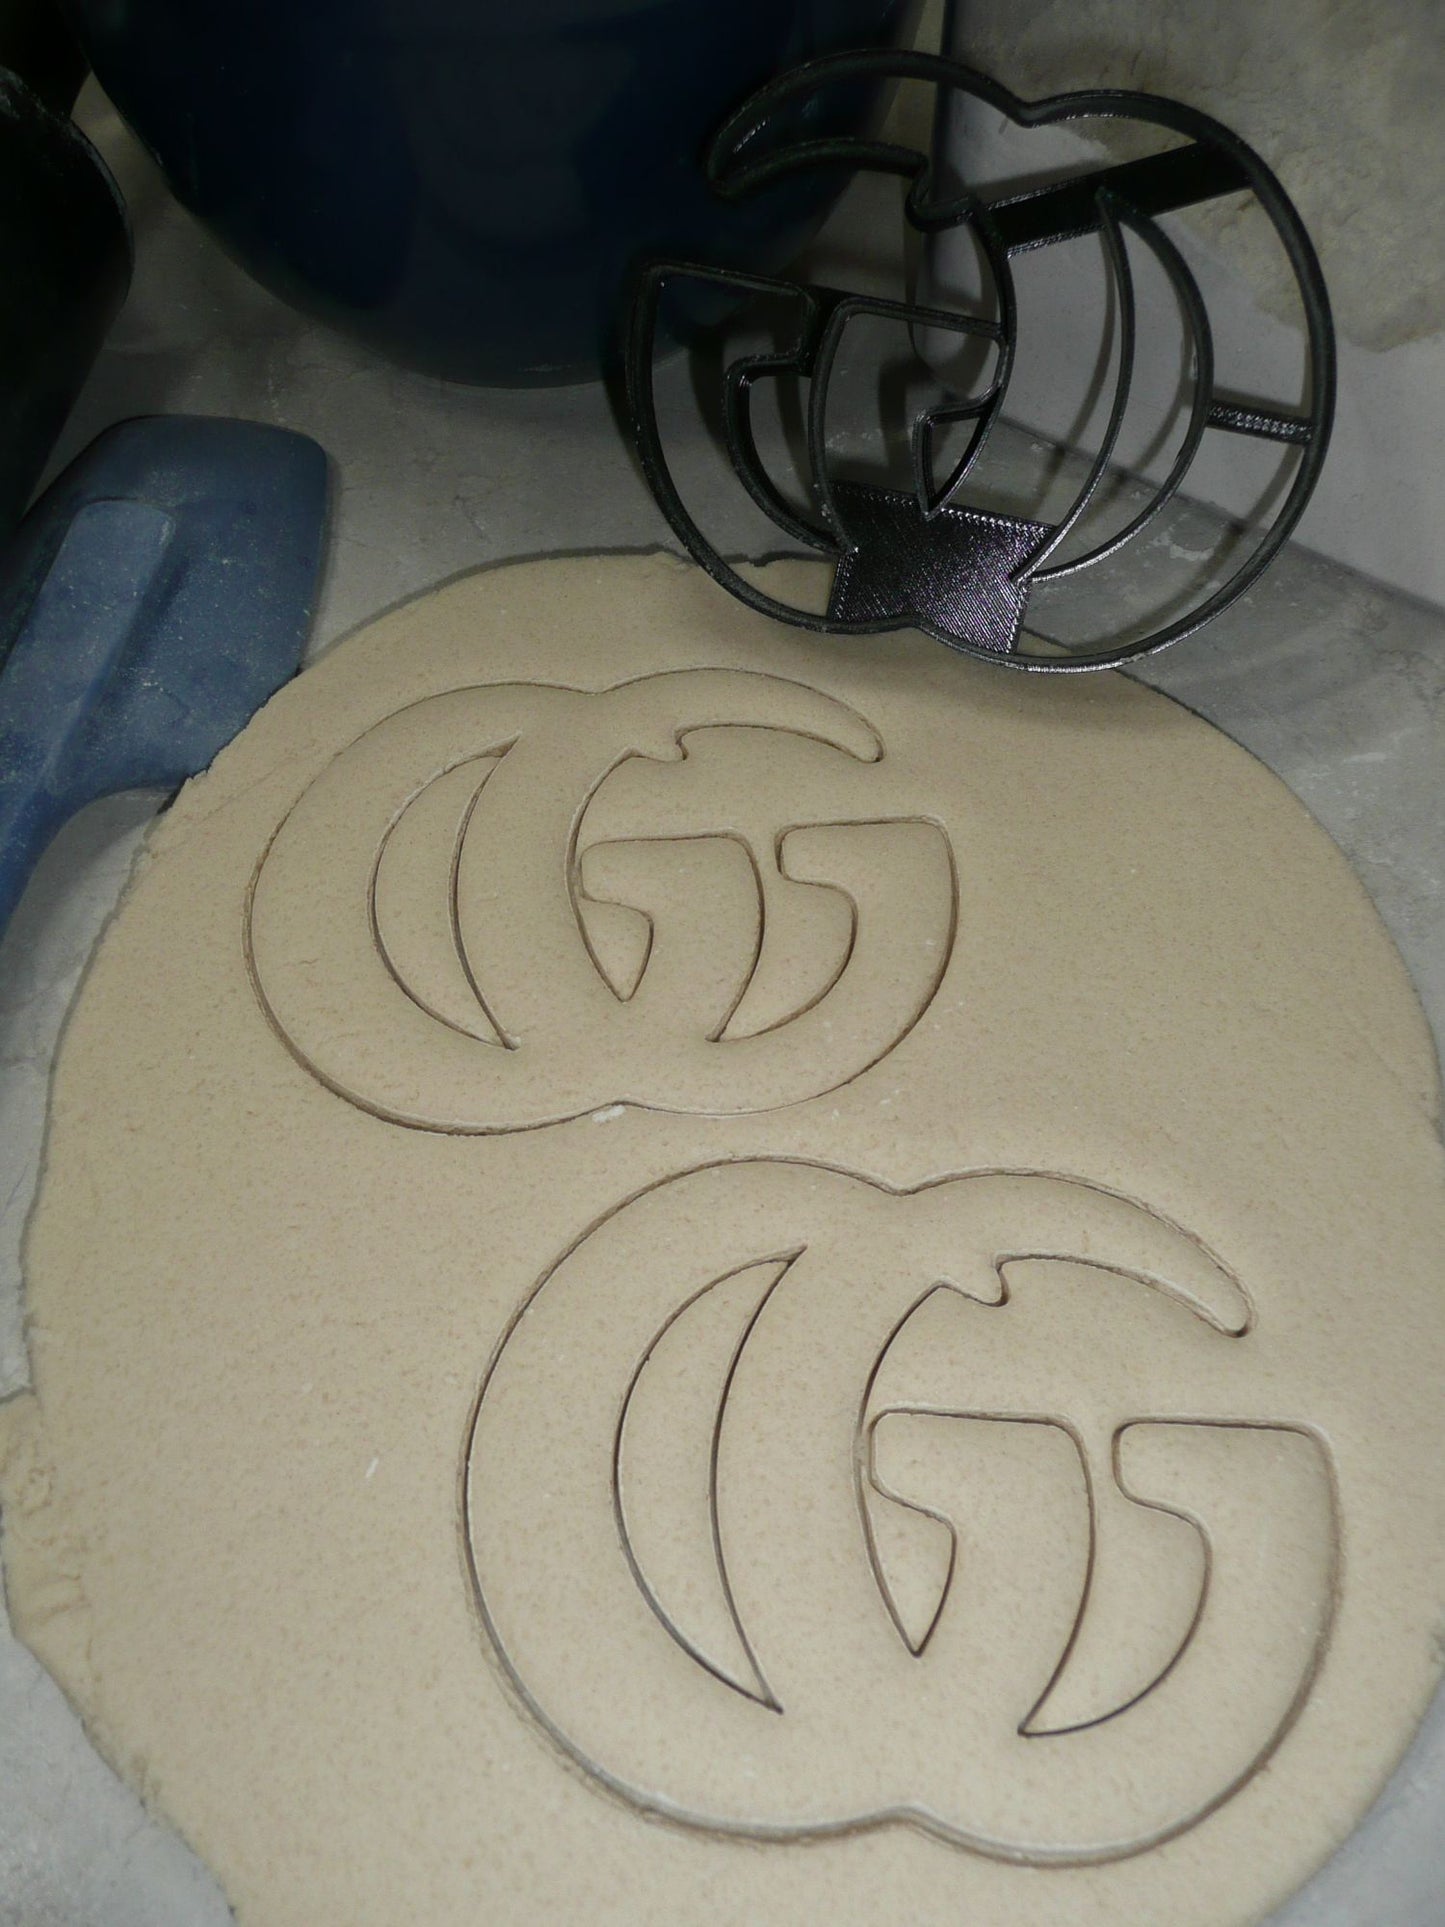 GG Outline Gucci Luxury Fashion Brand Cookie Cutter Made in USA PR4657